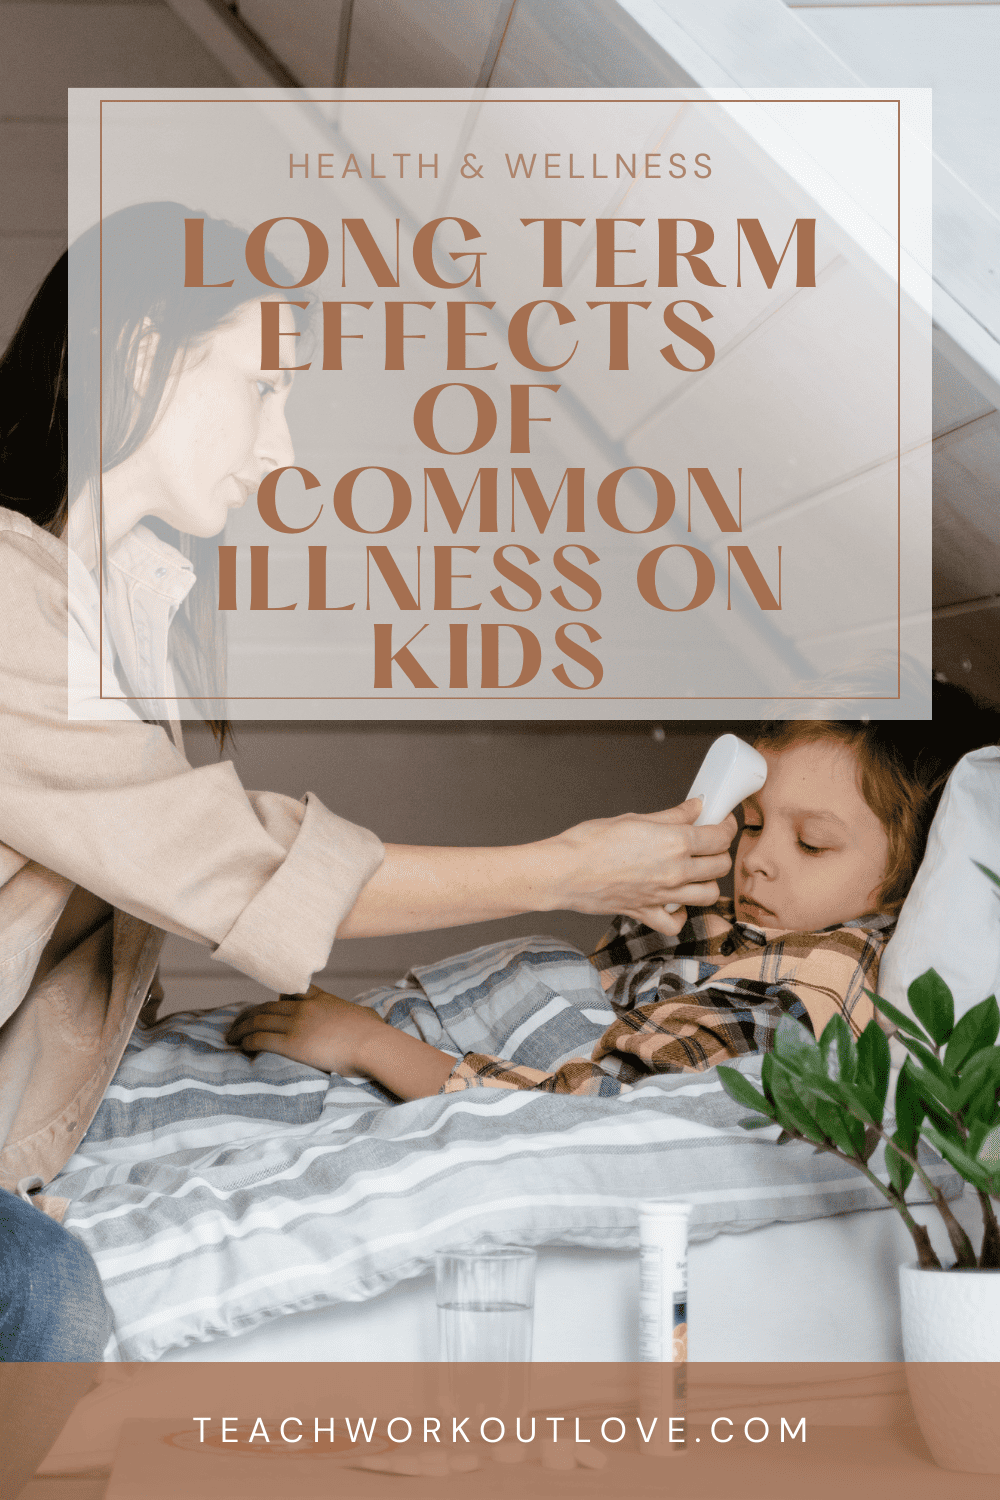 Are your kids sick a lot? In this article, we take a look at the long-term effects of common childhood illnesses.